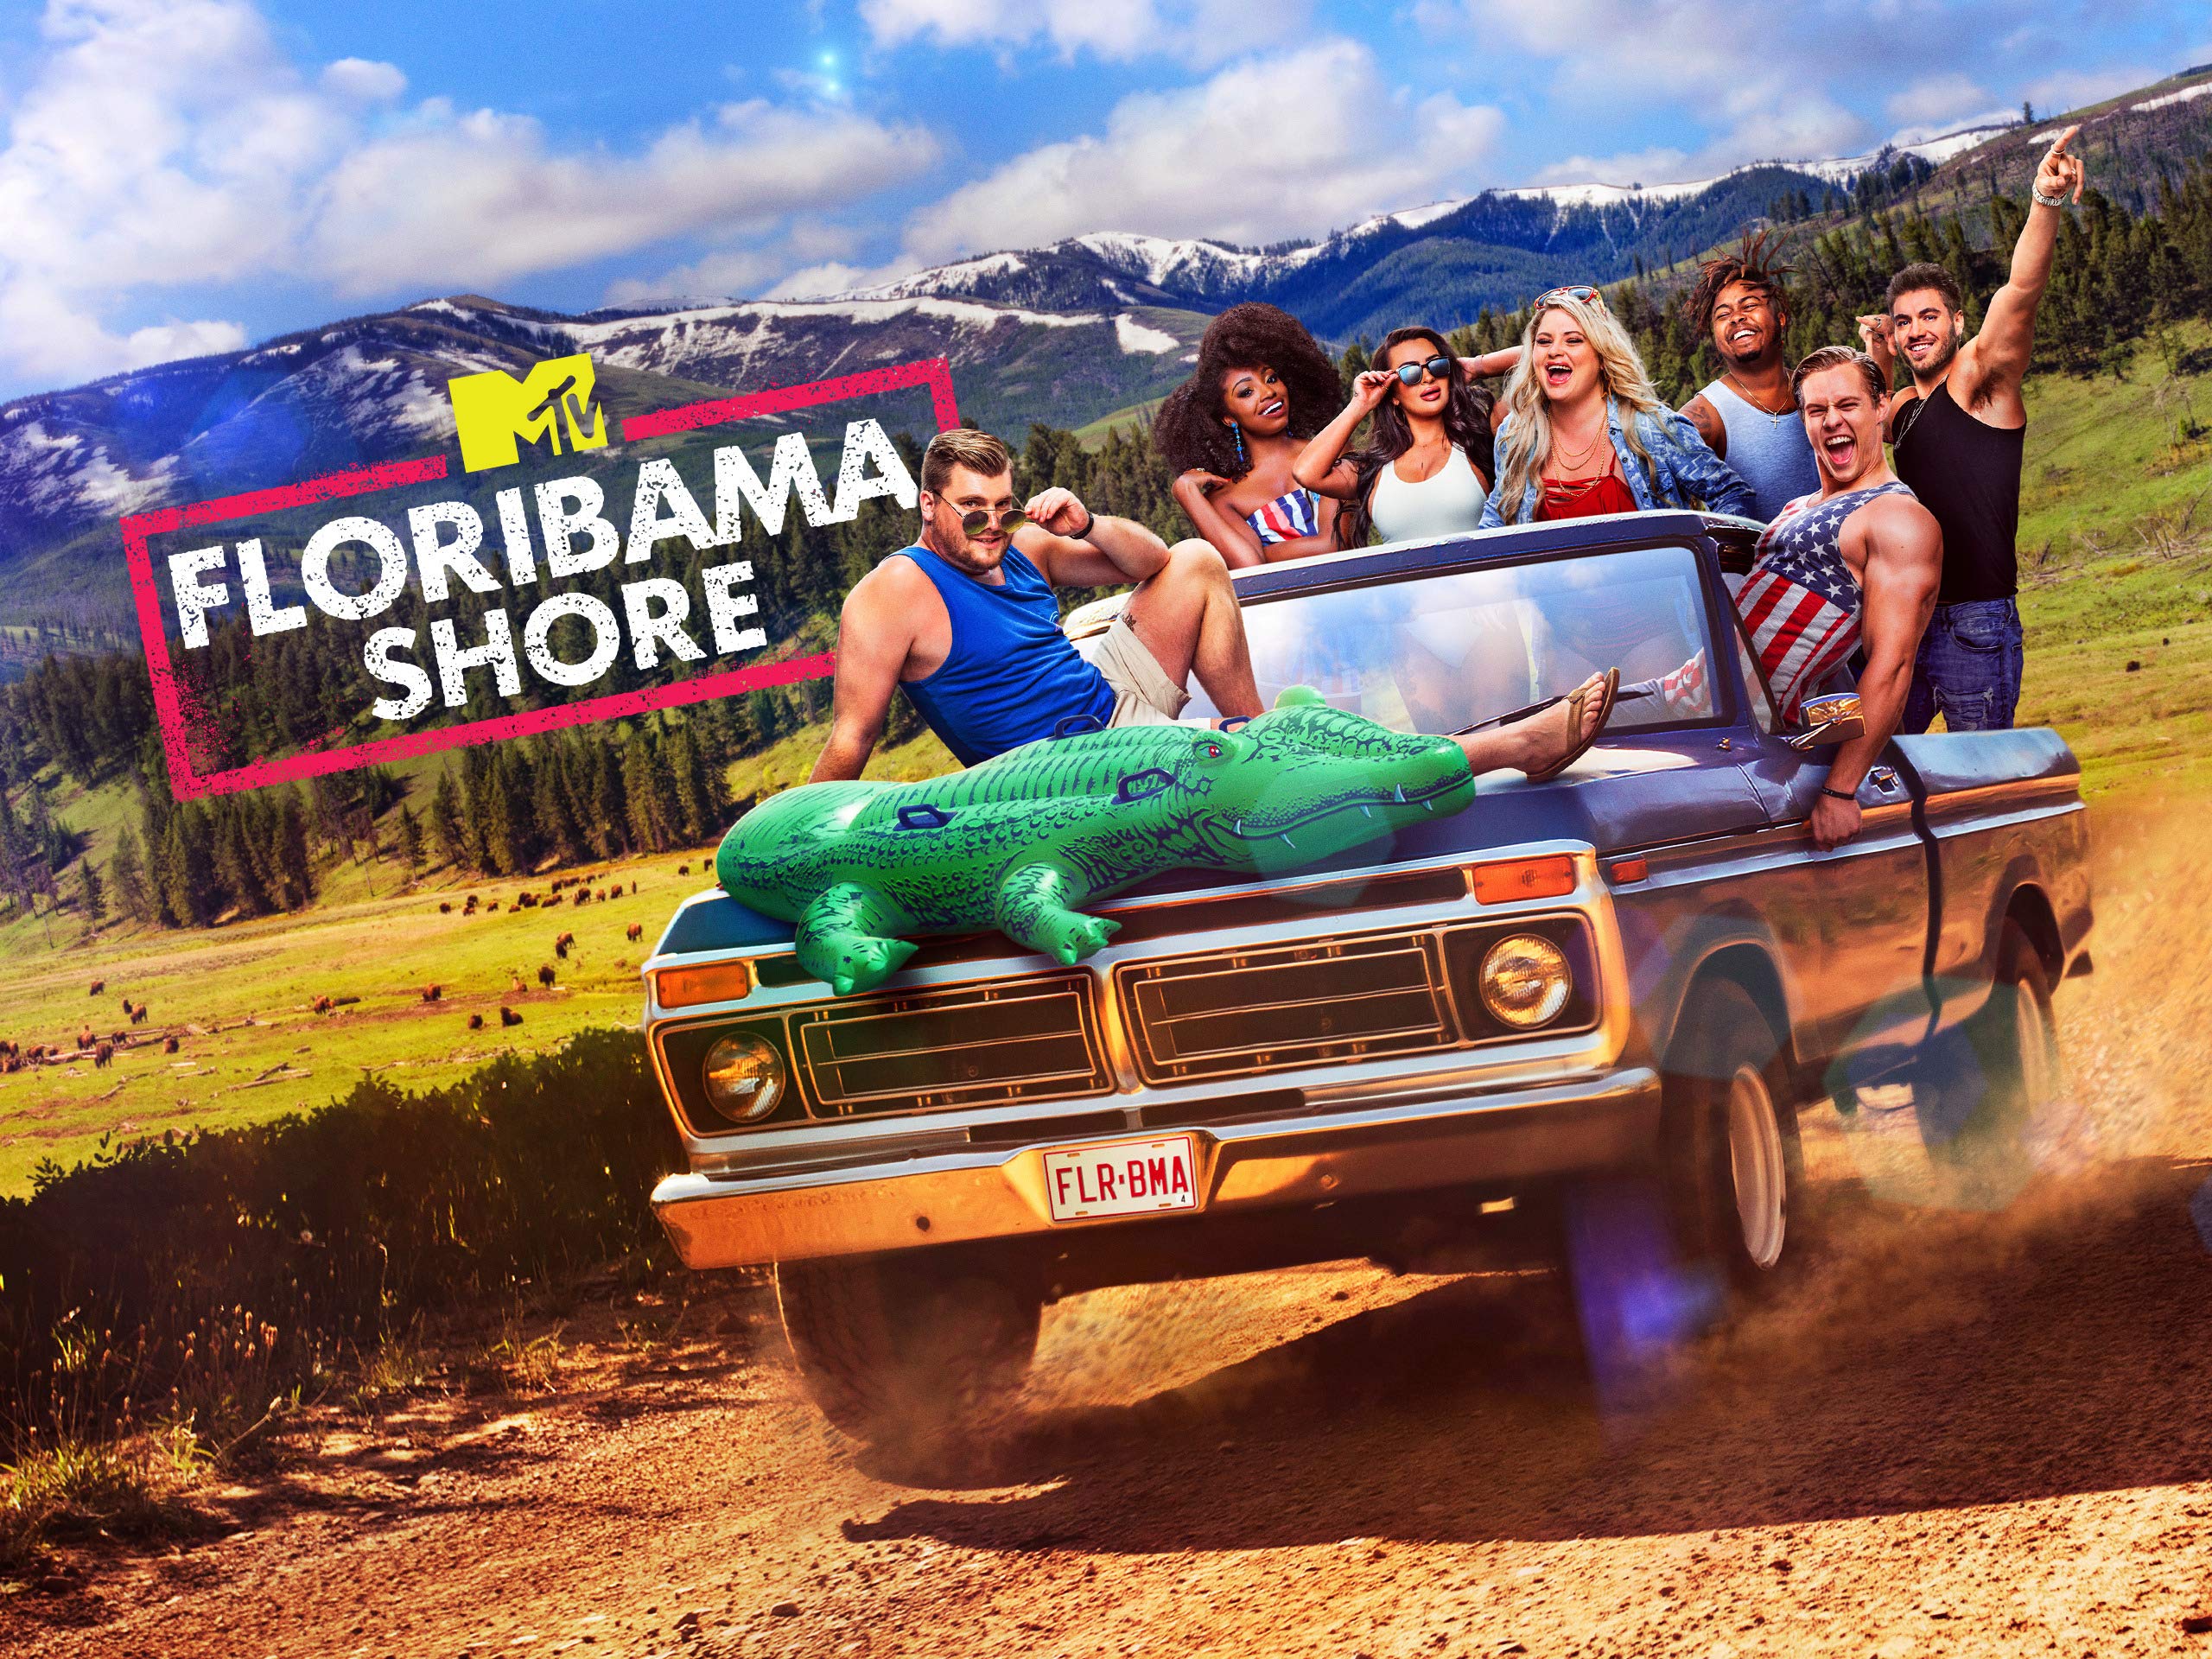 The cast of 'Floribama Shore' piled into a truck driving on a mountainous road in a promo for Season 4